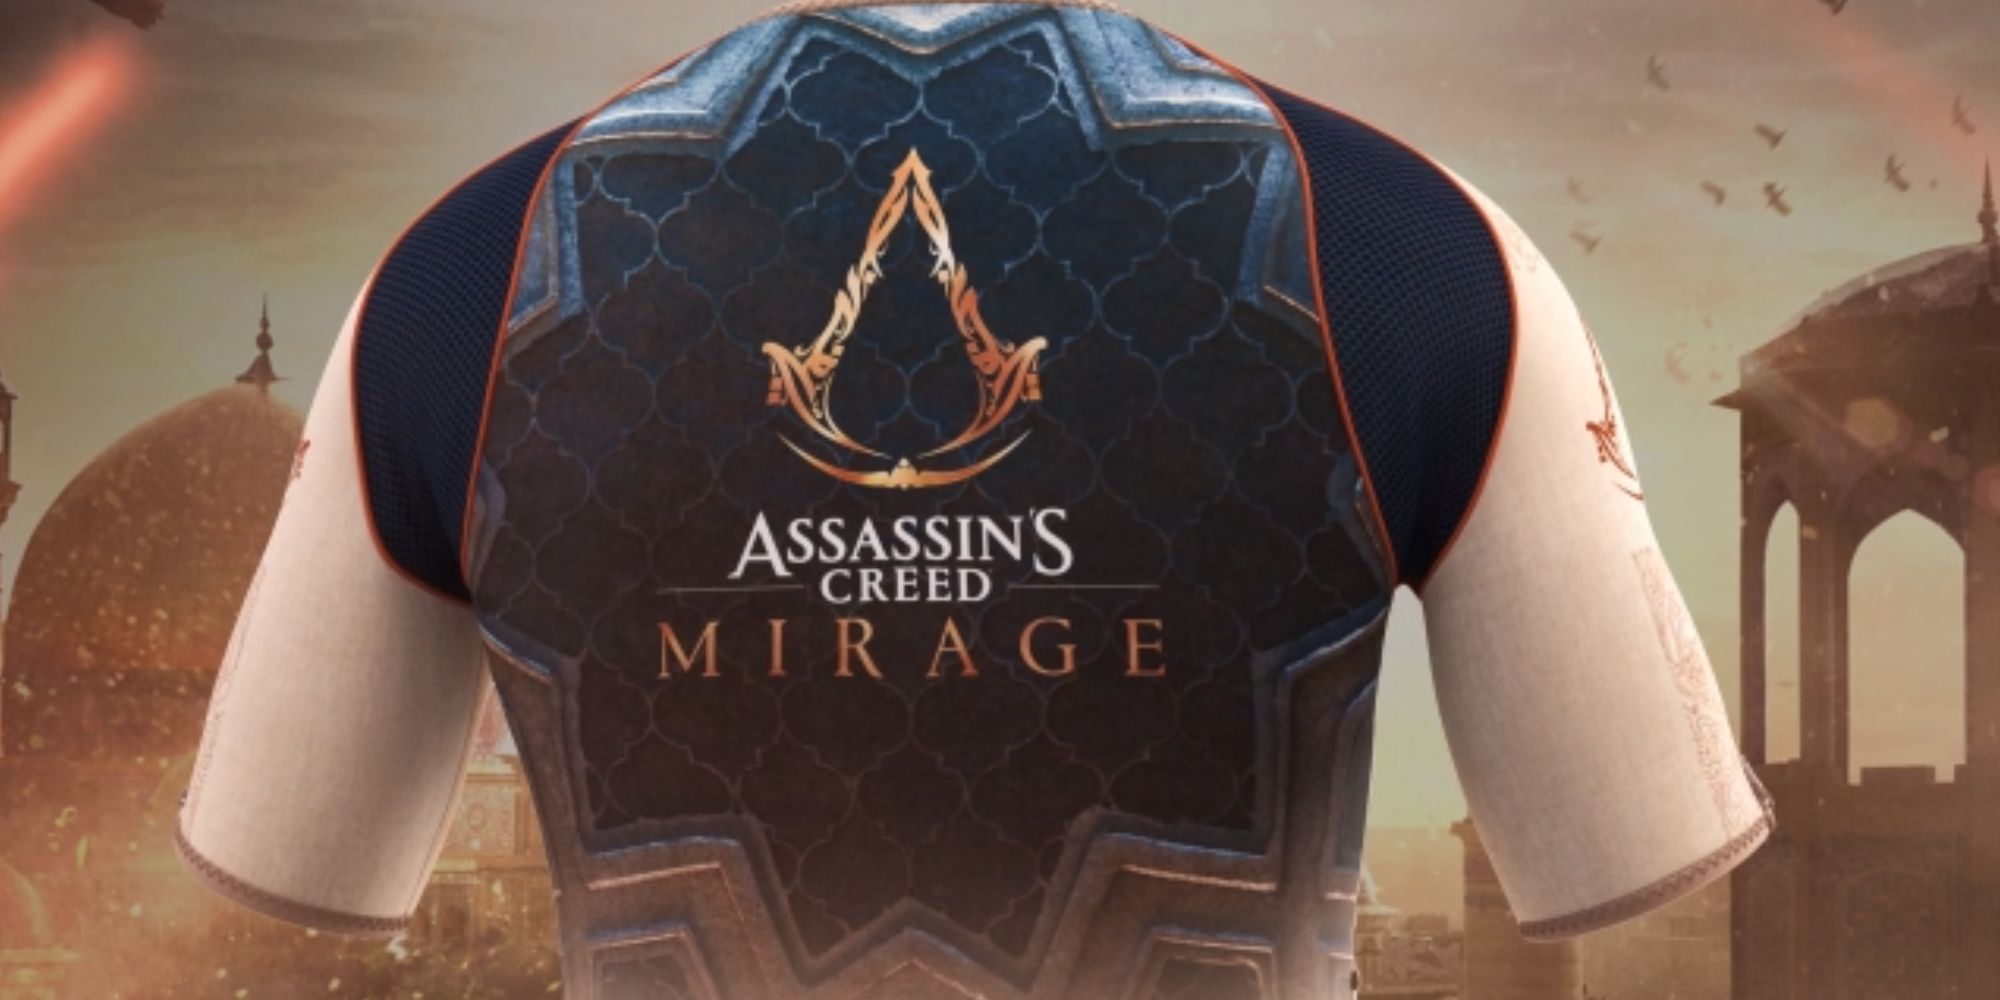 Assassin's Creed Mirage body suit